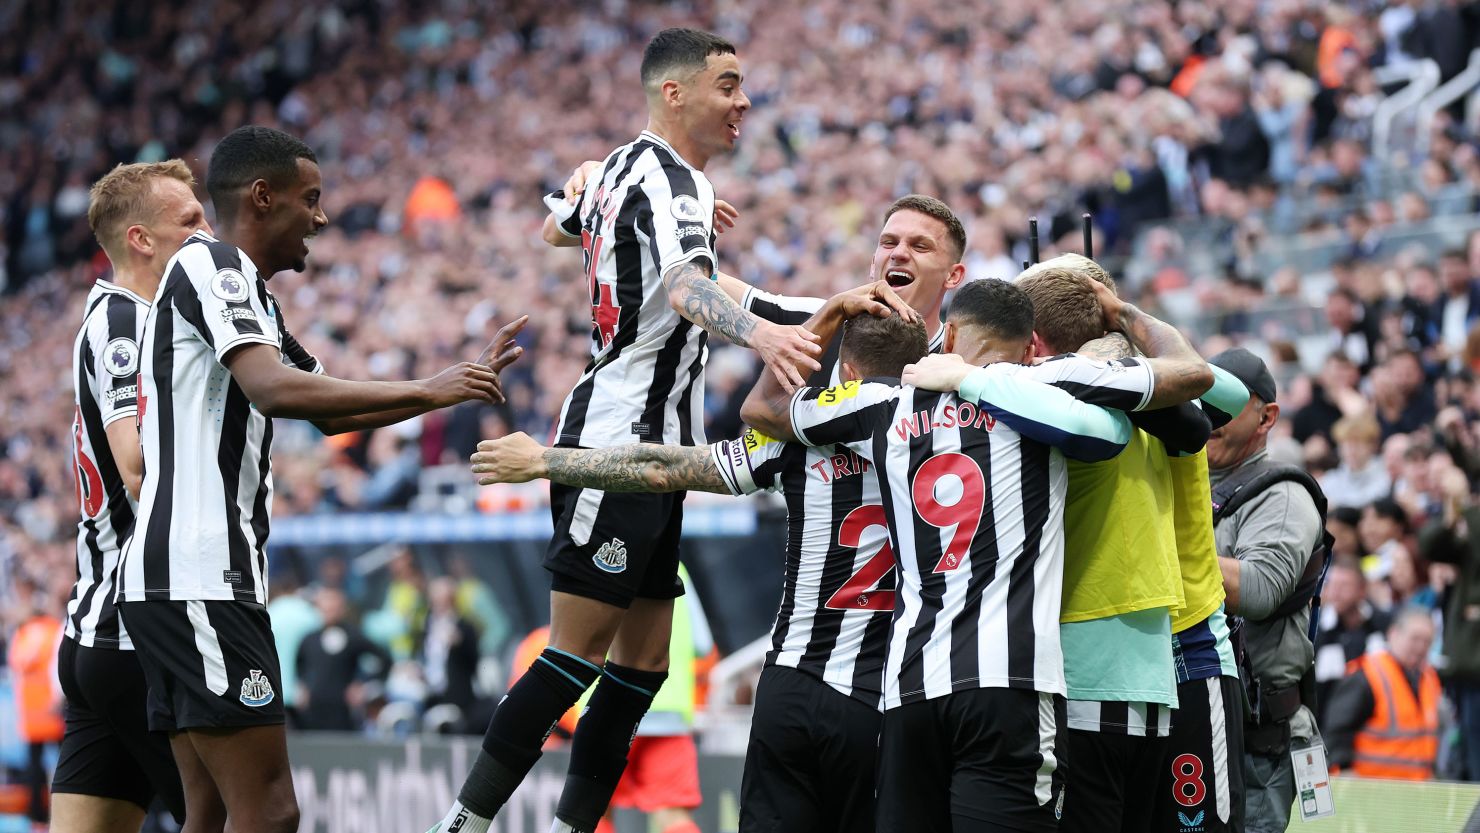 Newcastle United will play in the Champions League for the first